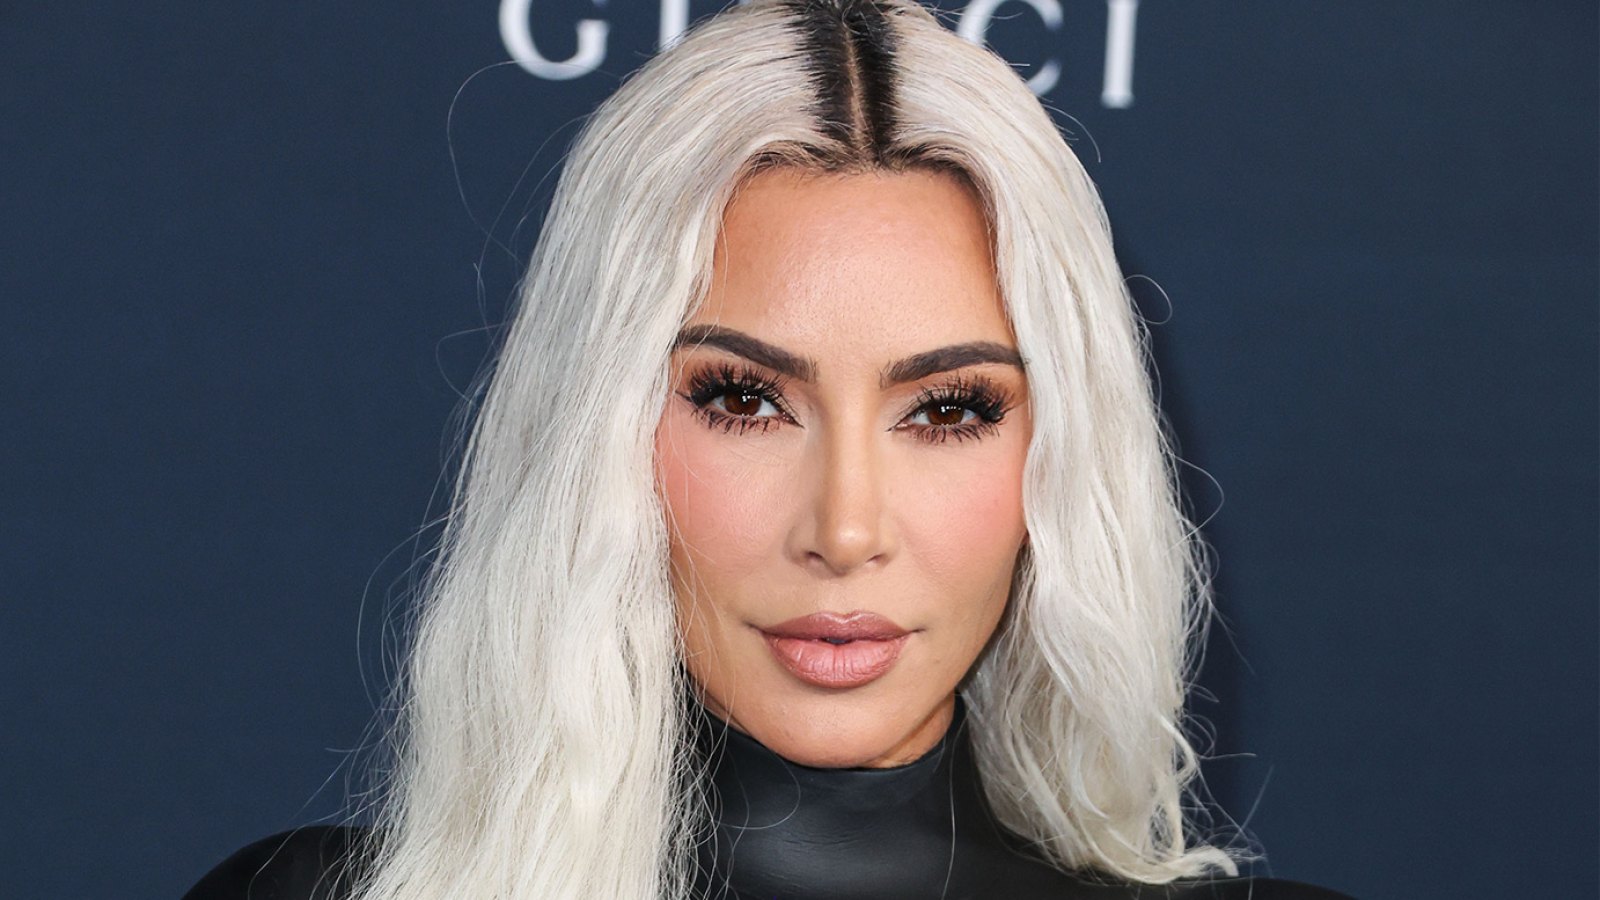 North West Pranks Mom Kim Kardashian By Pretending to Shave Off Her Eyebrows- ‘Not Funny’ - 093 11th Annual LACMA Art + Film Gala 2022, Los Angeles County Museum of Art, Los Angeles, California, United States - 05 Nov 2022